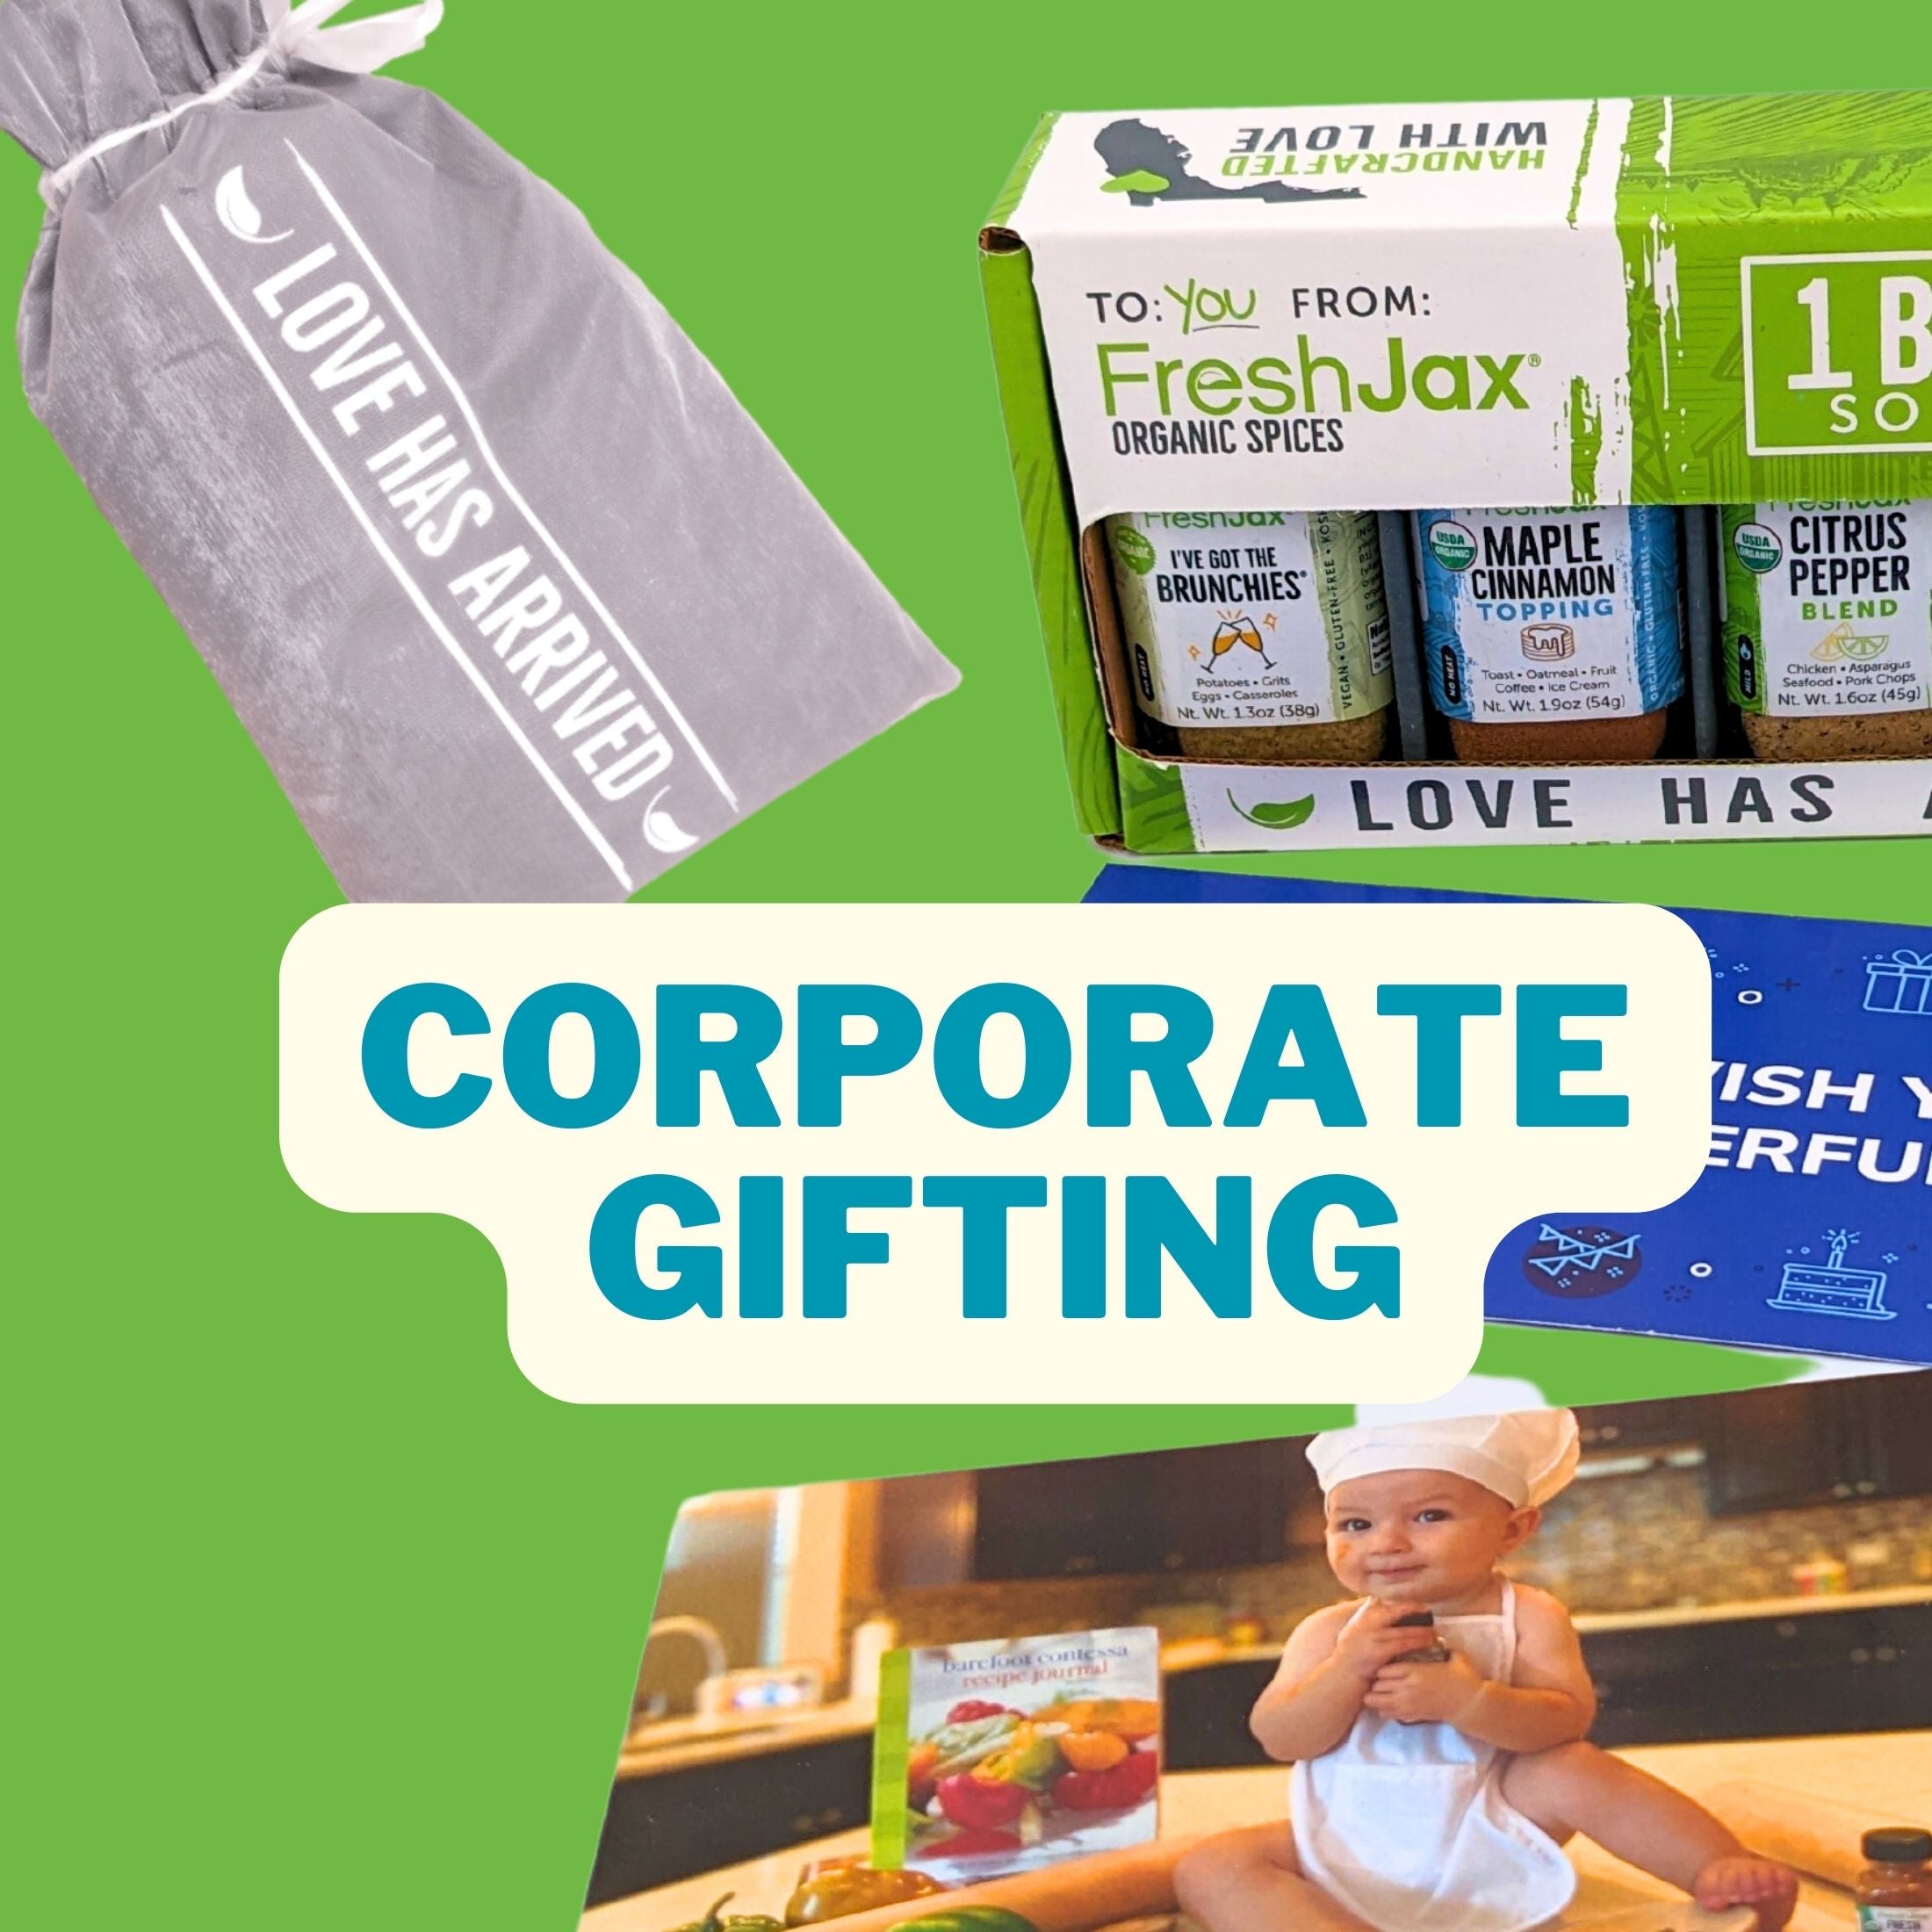 Gift Sets that are optimized for Corporate Gifting